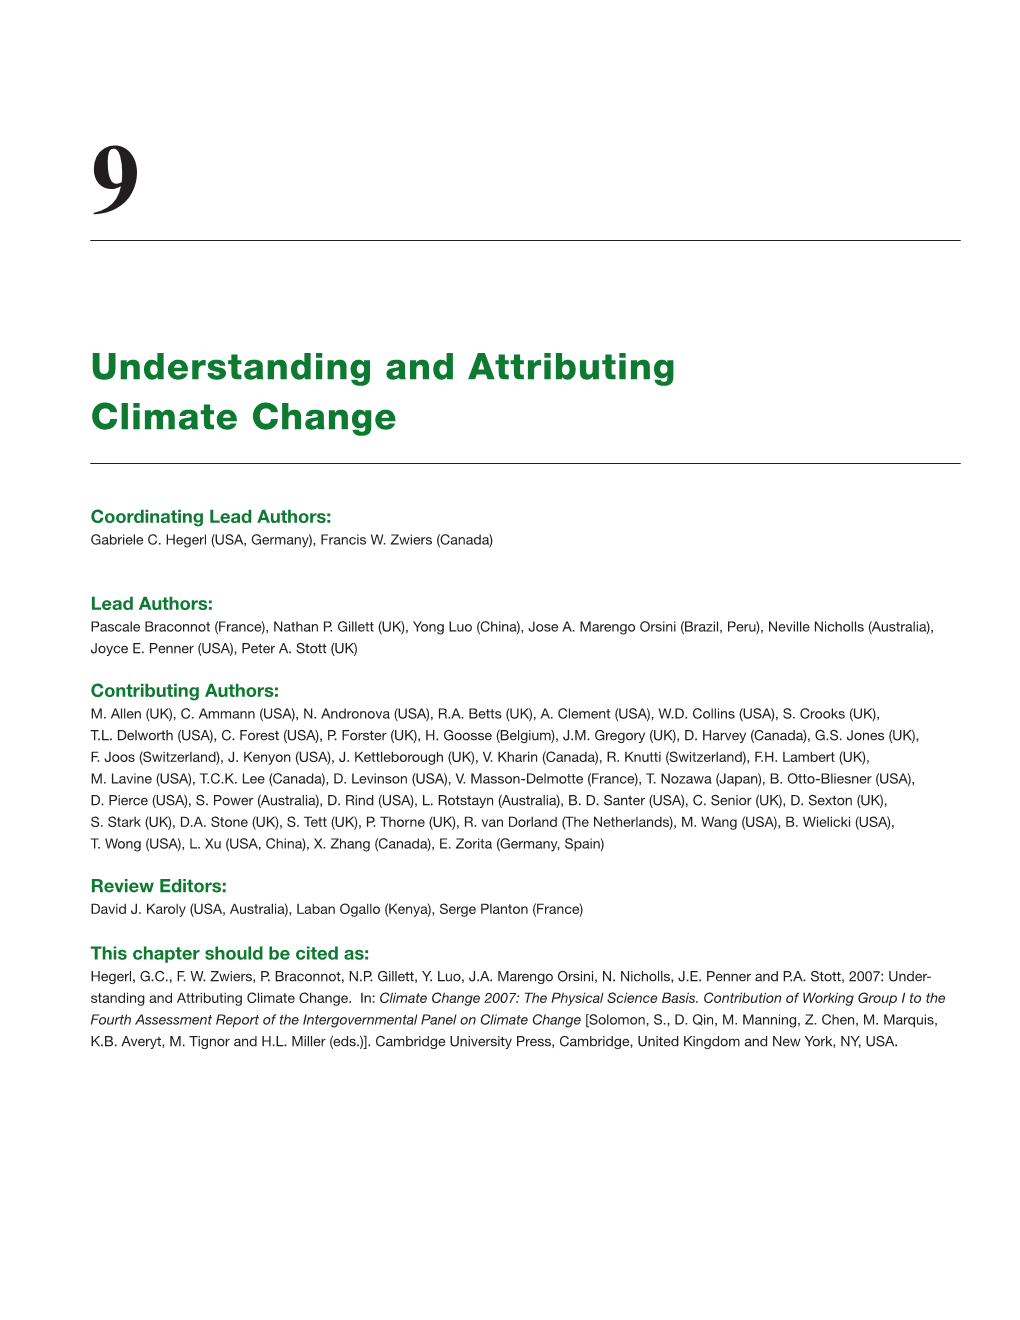 Understanding and Attributing Climate Change